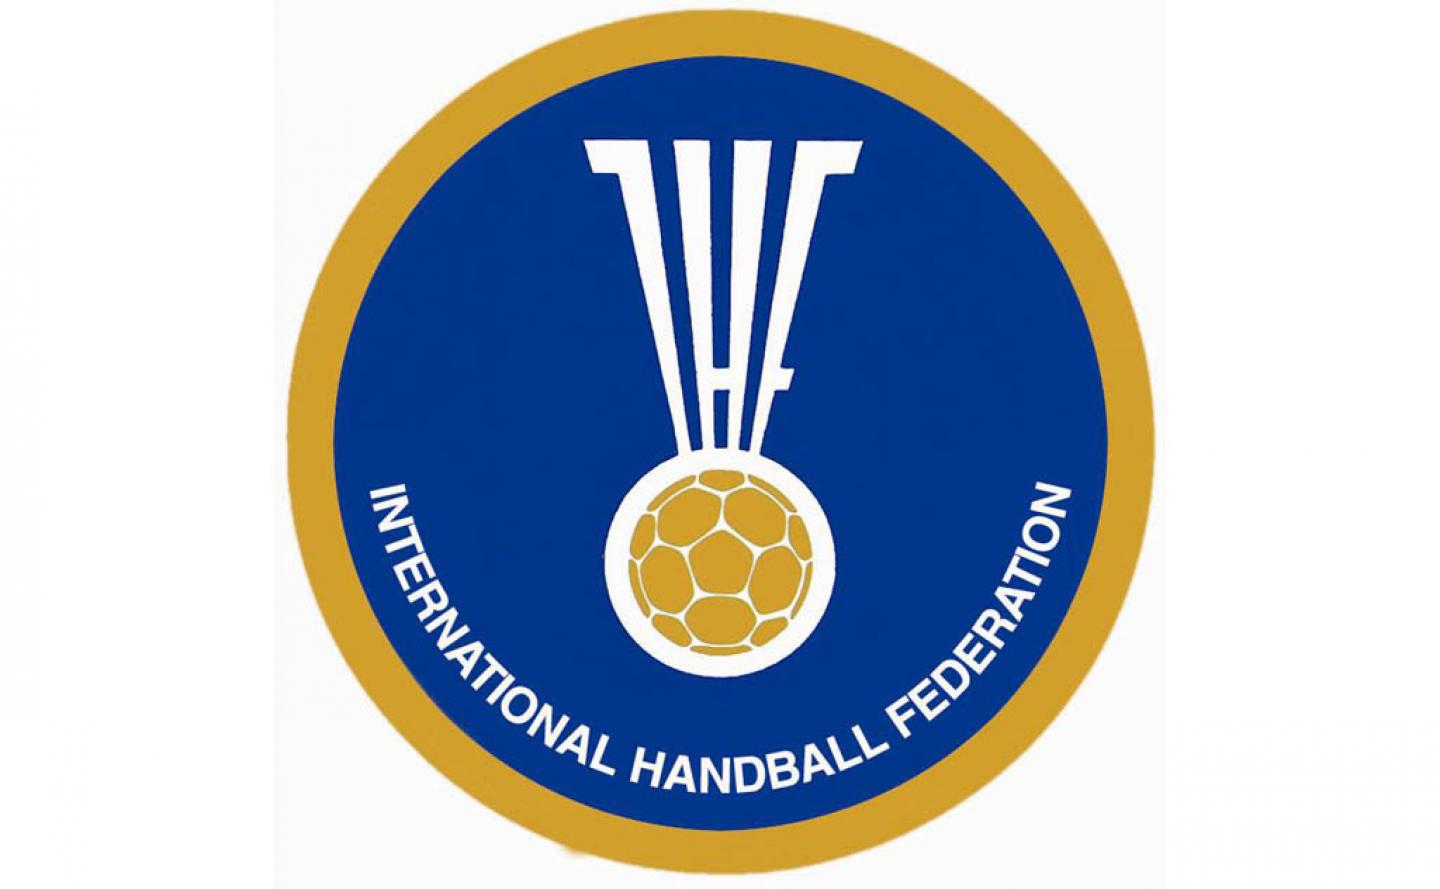 Awarding and announcement of the Grundfos World Handball Players of the Year on Sunday